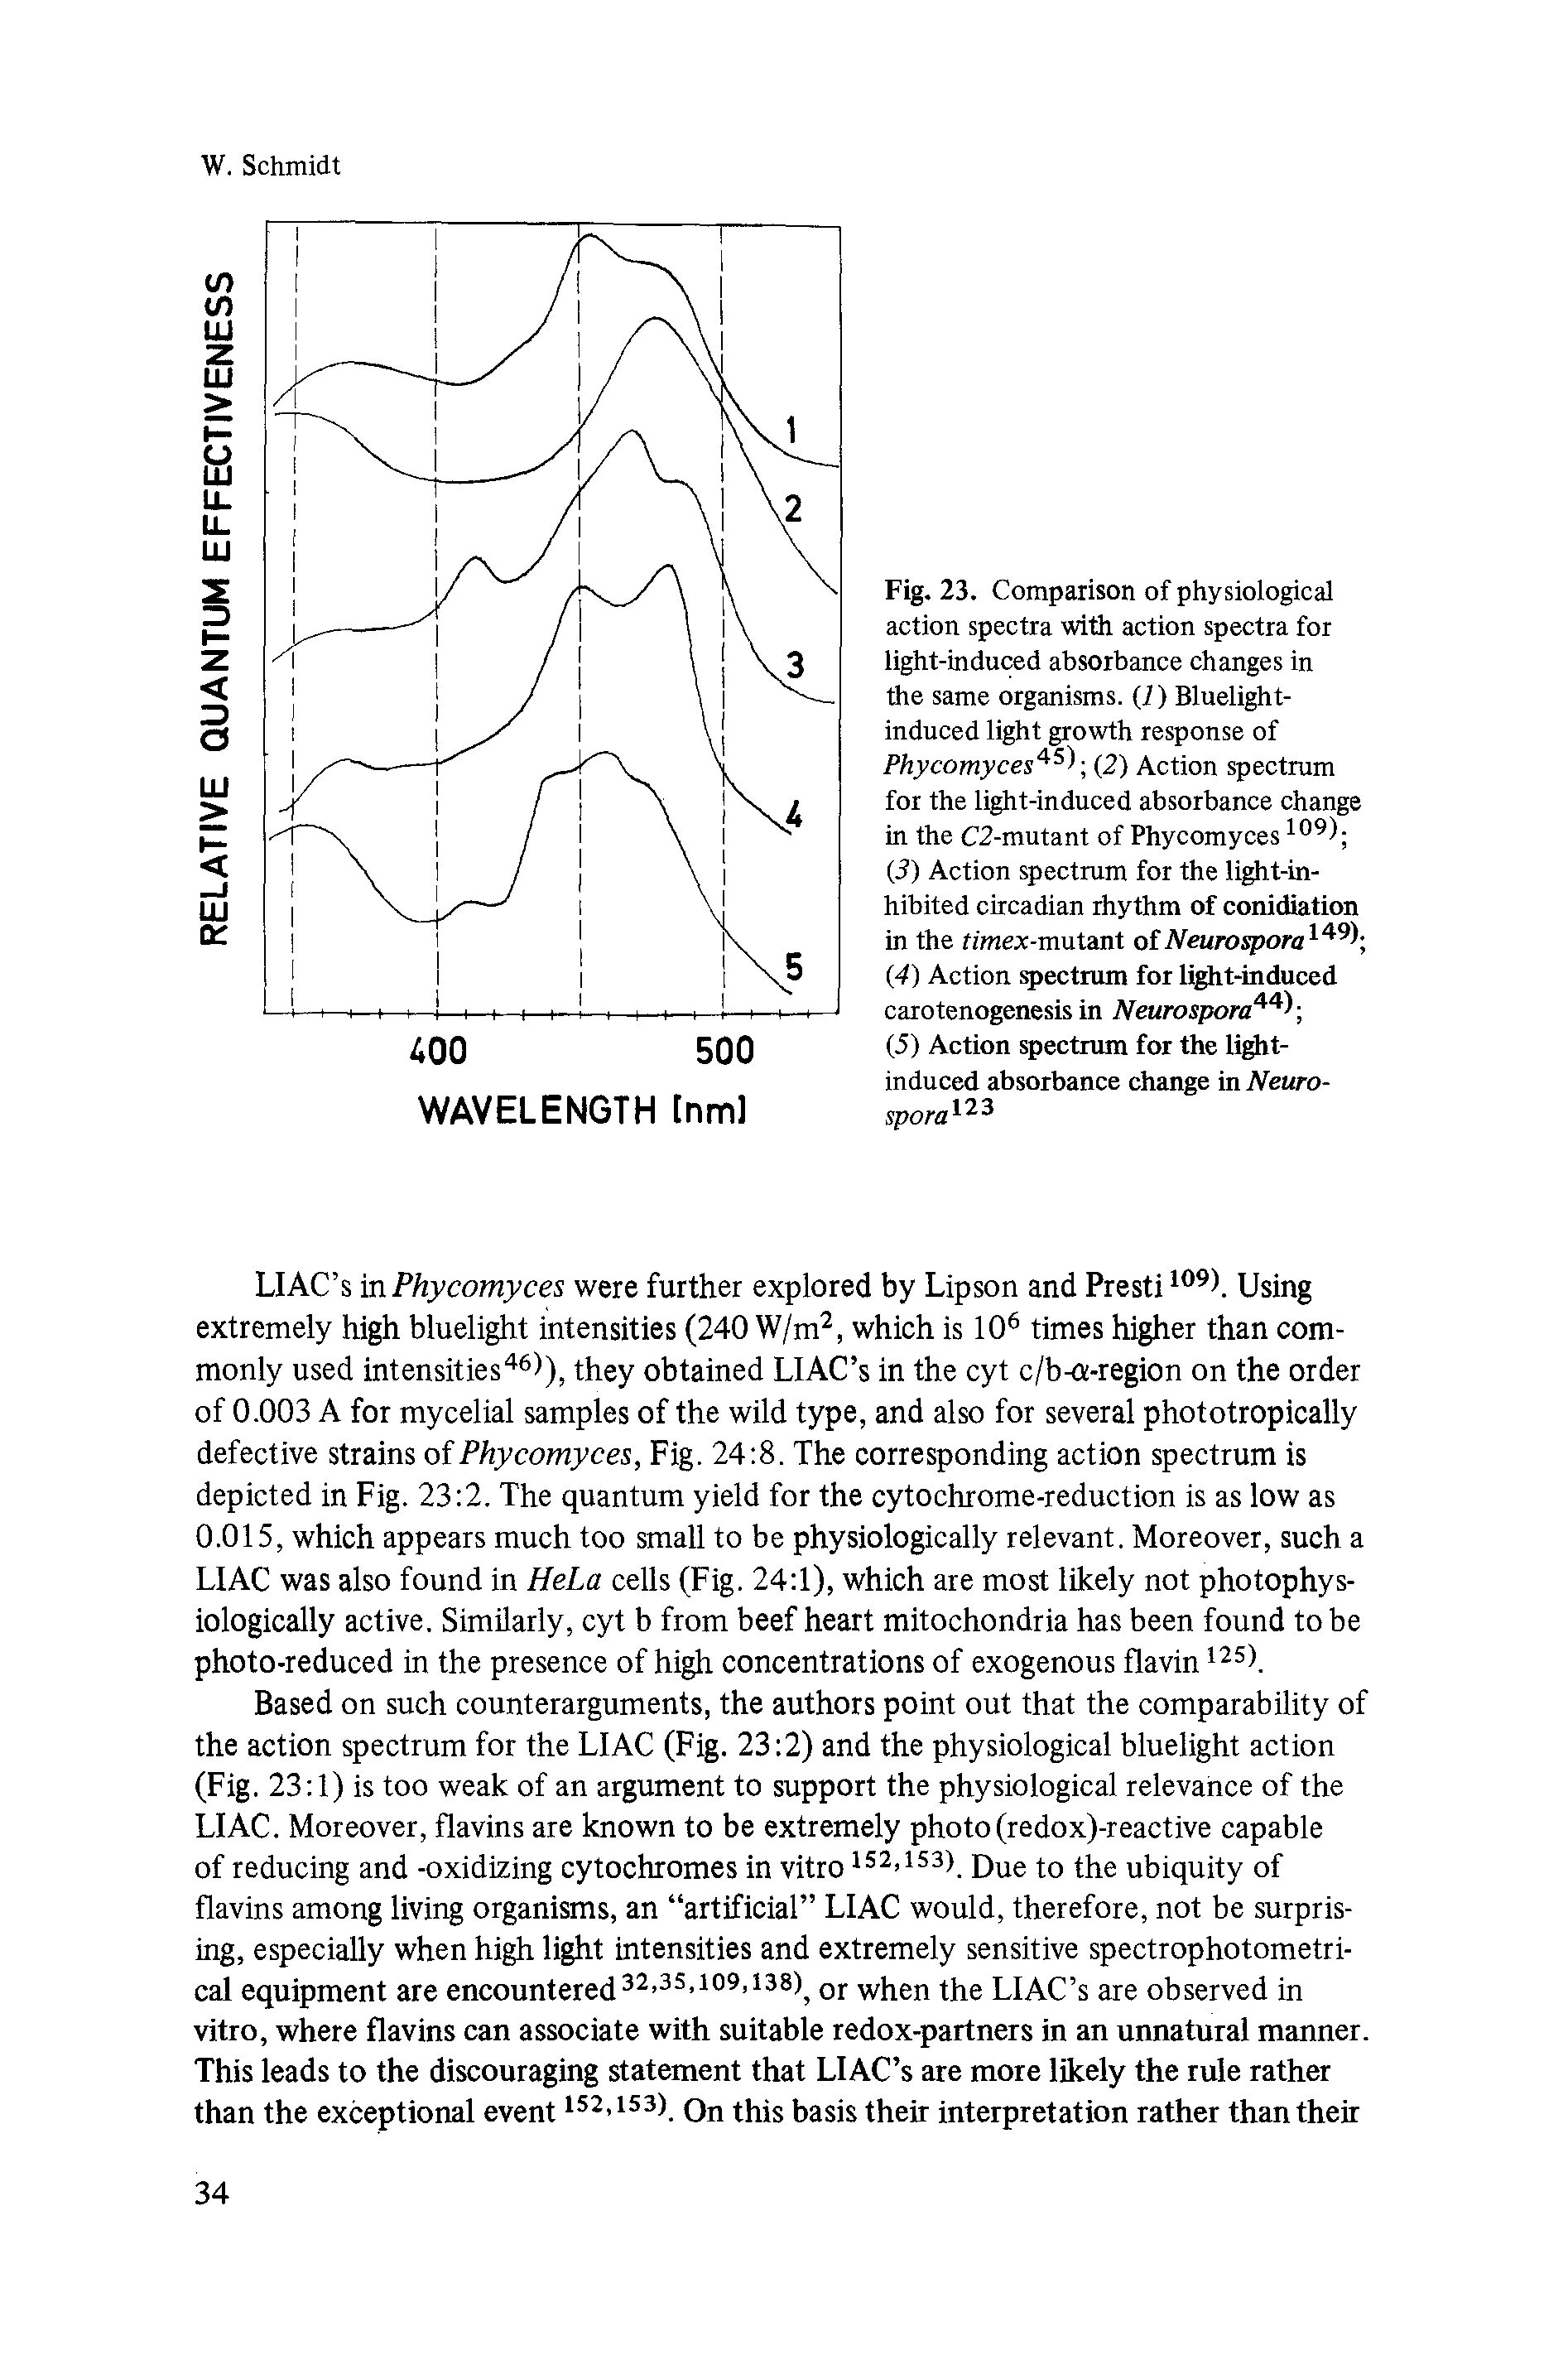 Fig. 23. Comparison of physiological action spectra with action spectra for light-induced absorbance changes in the same organisms, (1) Bluelight-induced light growth response of Phycomyces45 (2) Action spectrum for the light-induced absorbance change in the C2-mutant of Phycomyces109) ...